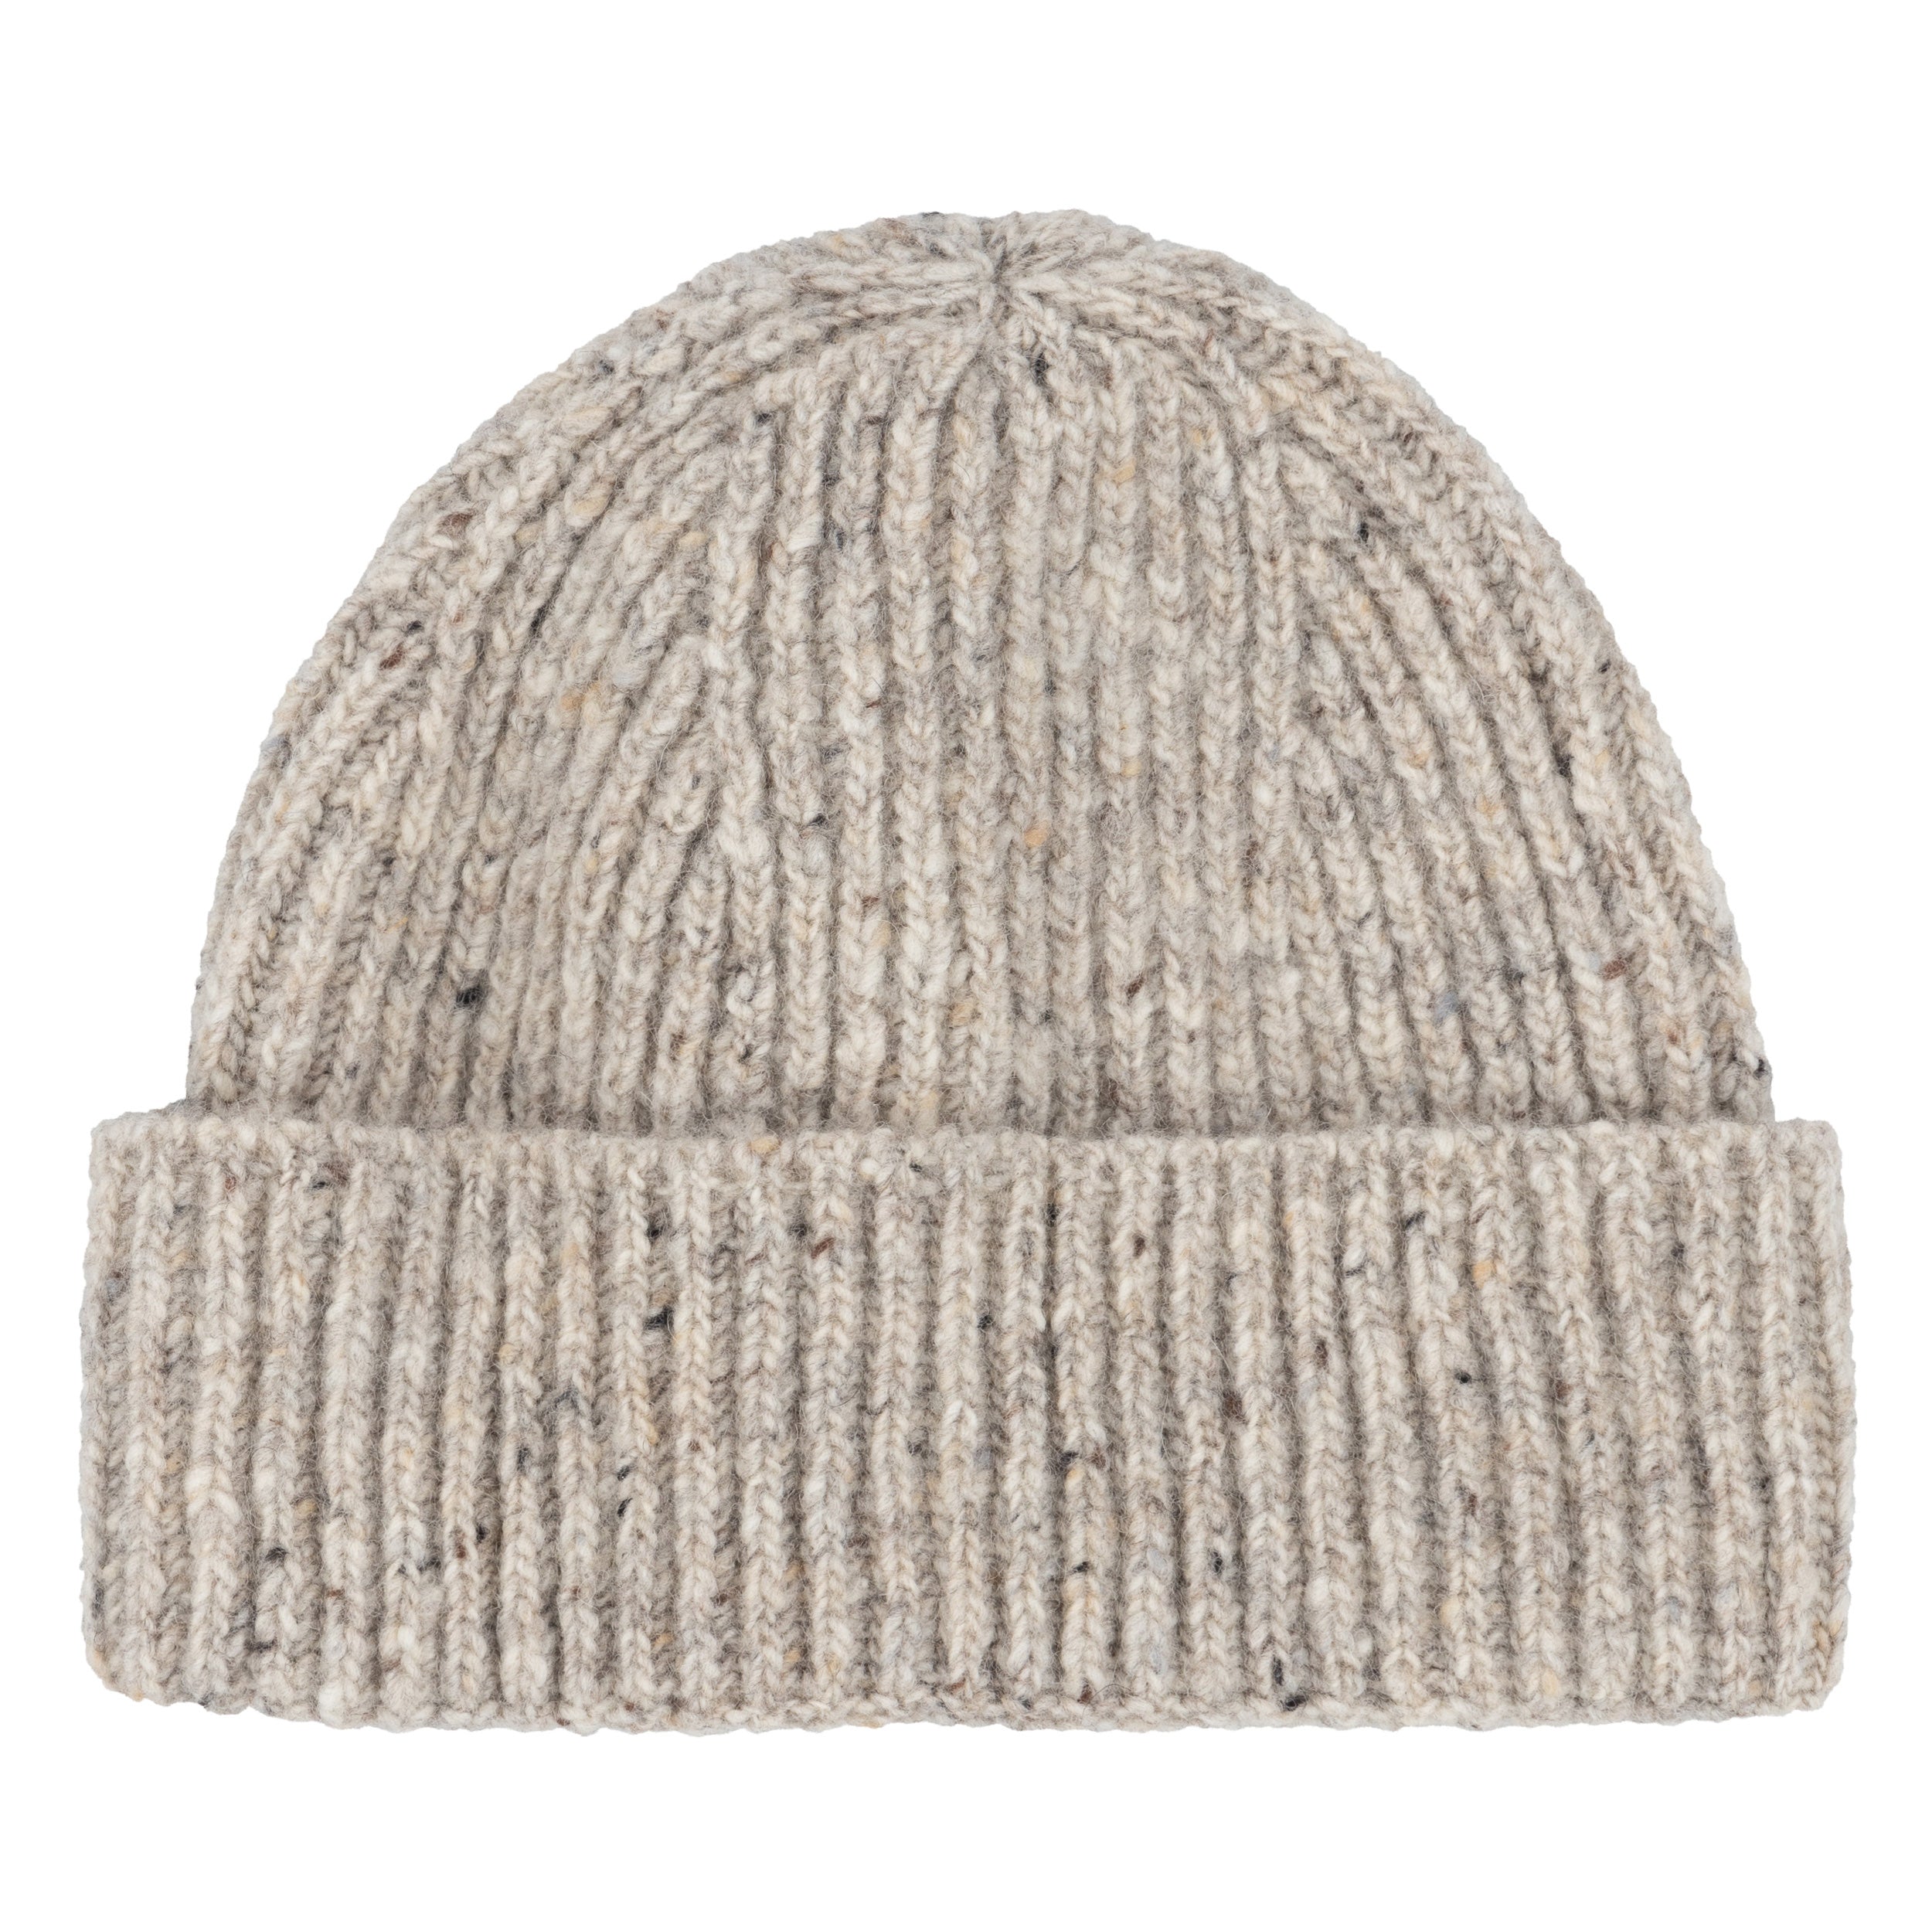 Carrier Company Donegal Wool Hat in Pale Grey